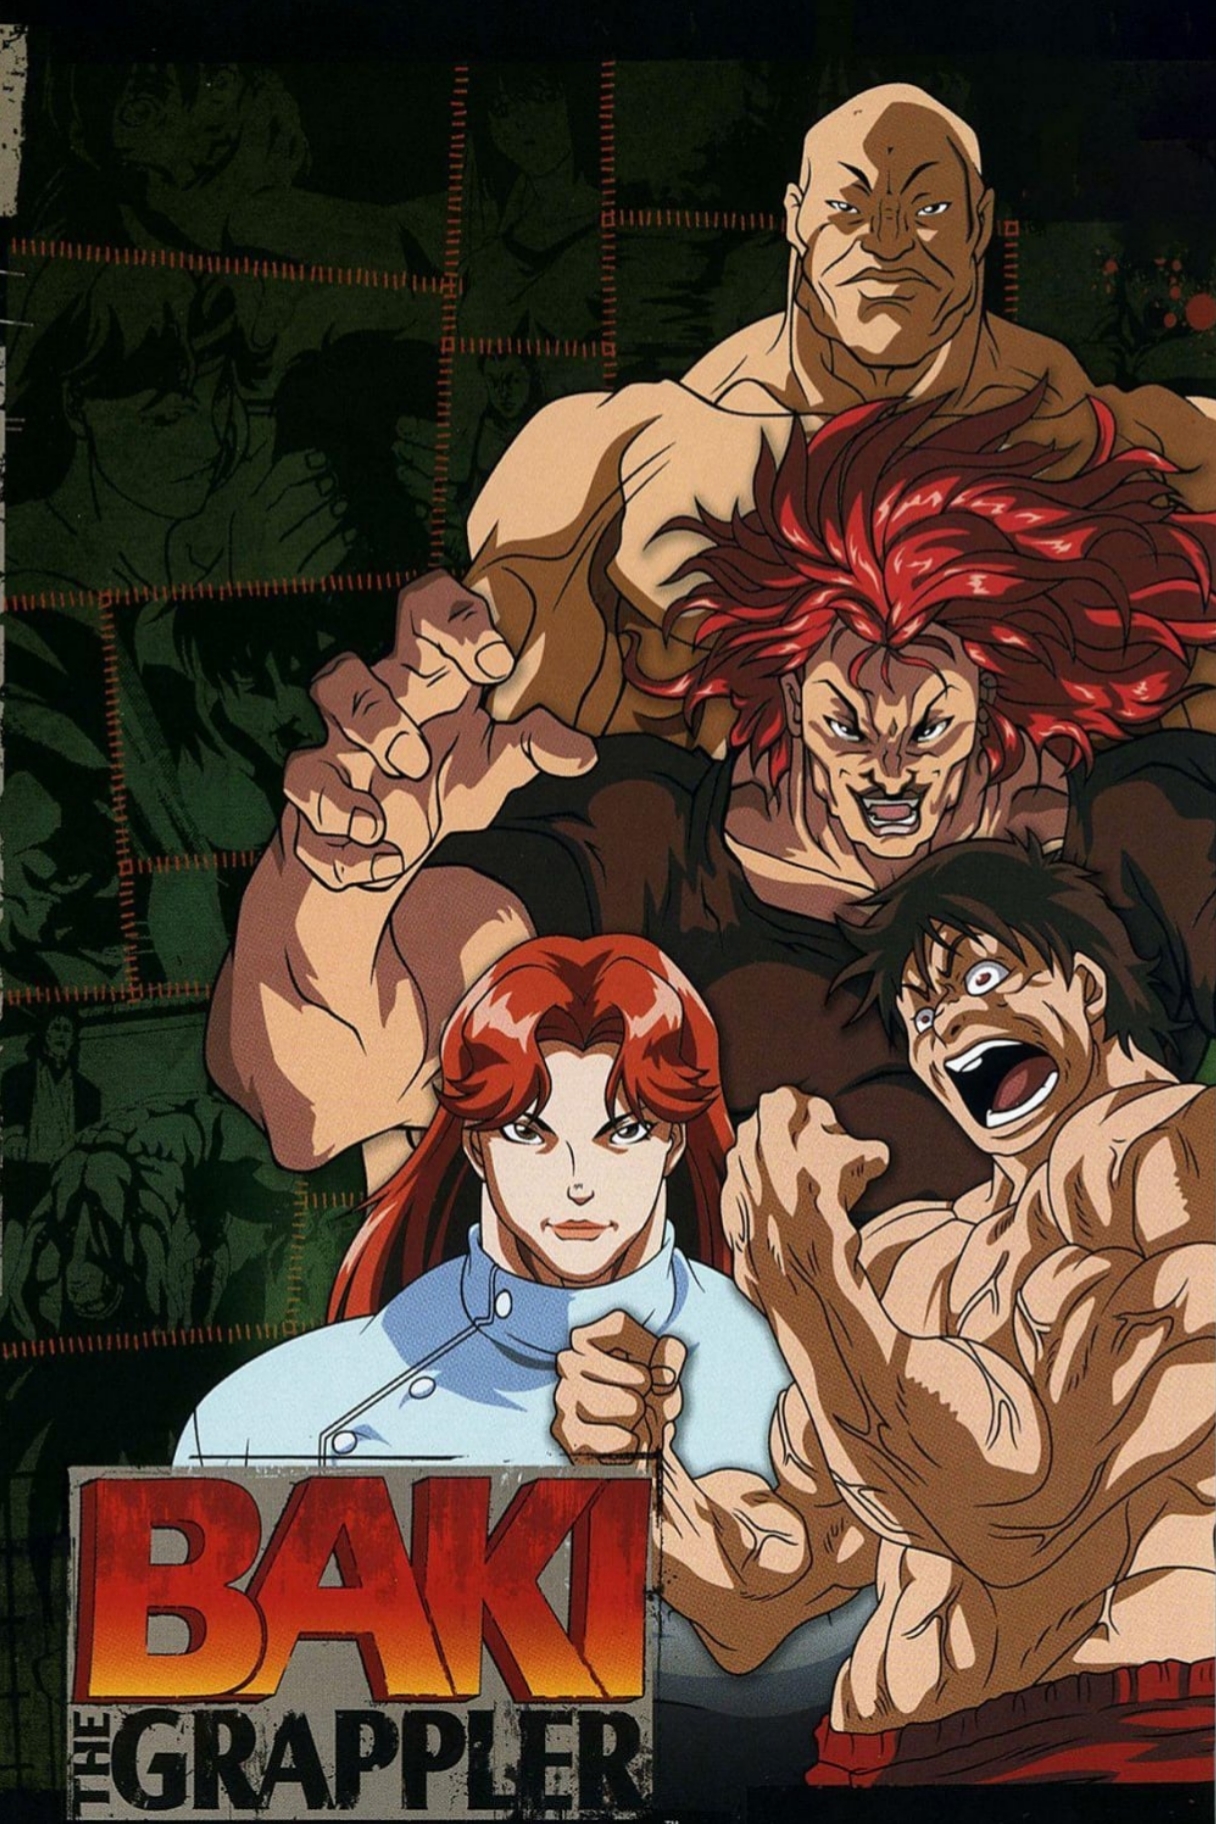 Japanese names of characters from “Baki the Grappler”